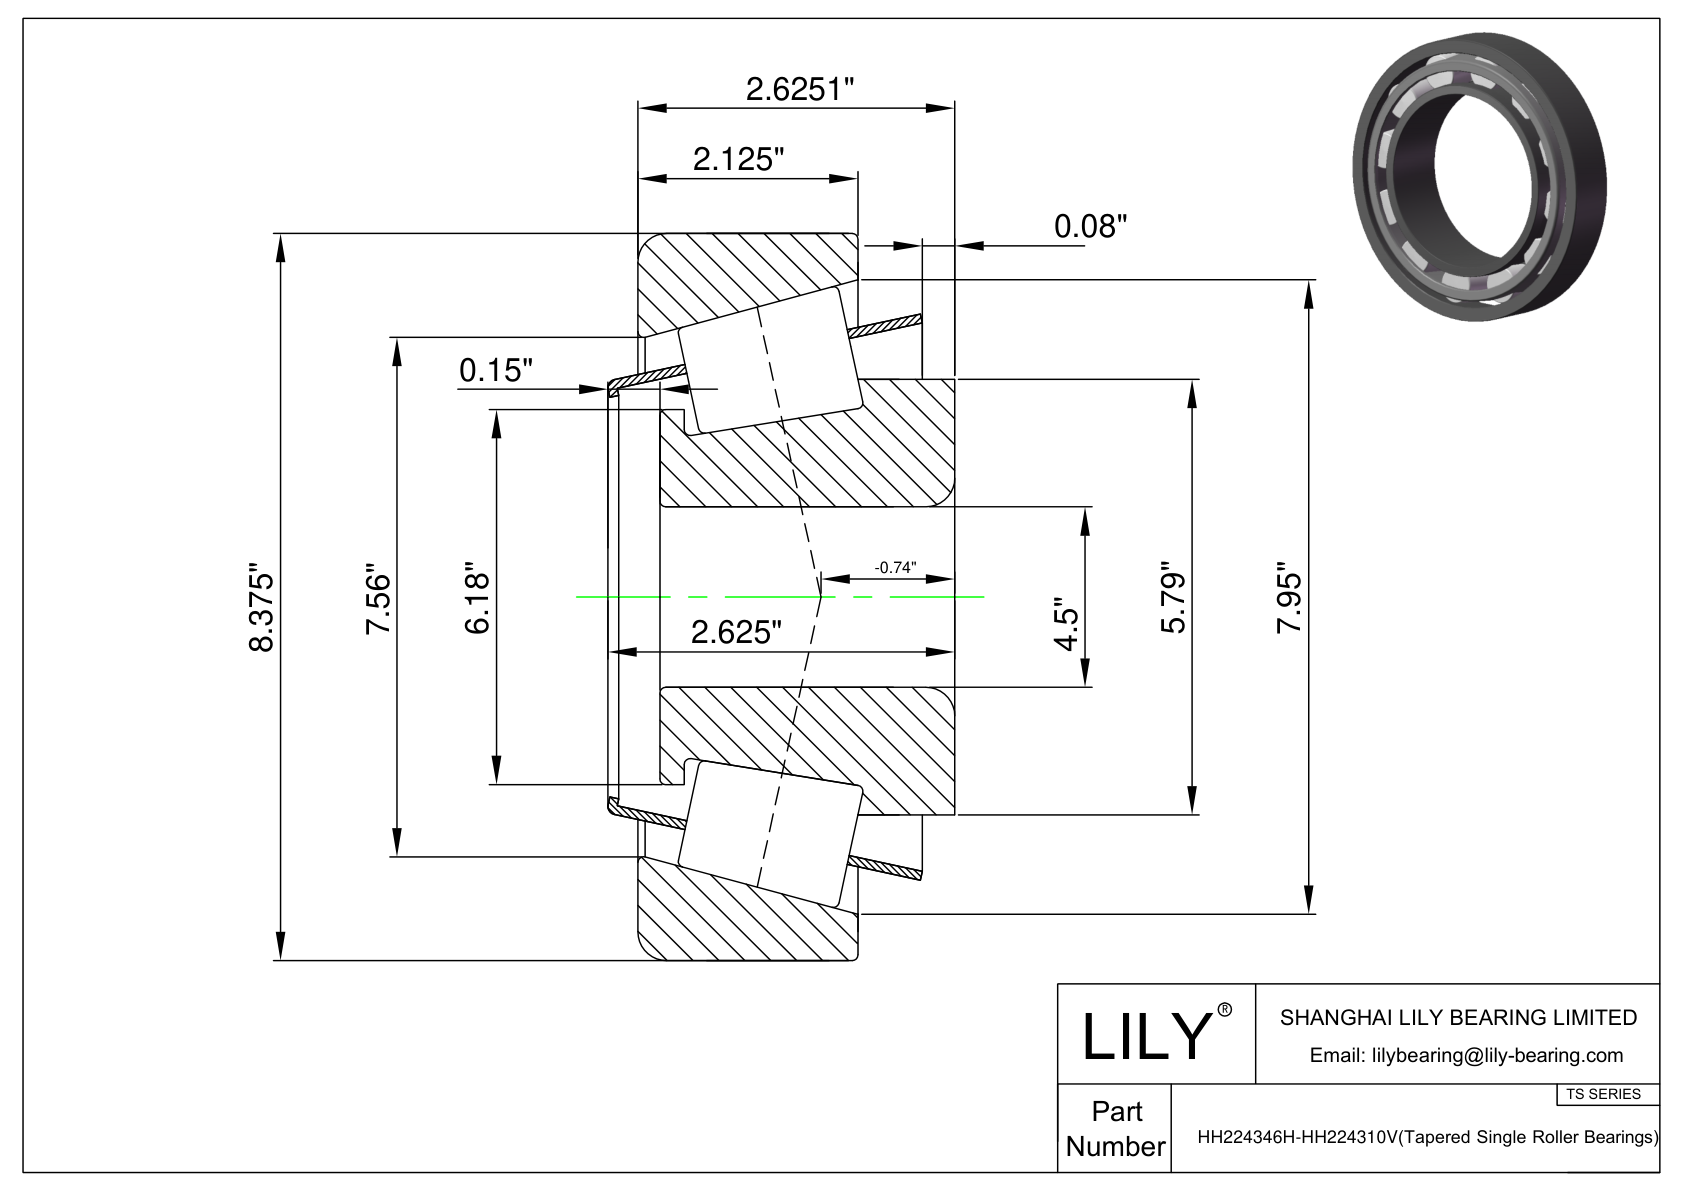 HH224346H-HH224310V TS (Tapered Single Roller Bearings) (Imperial) cad drawing